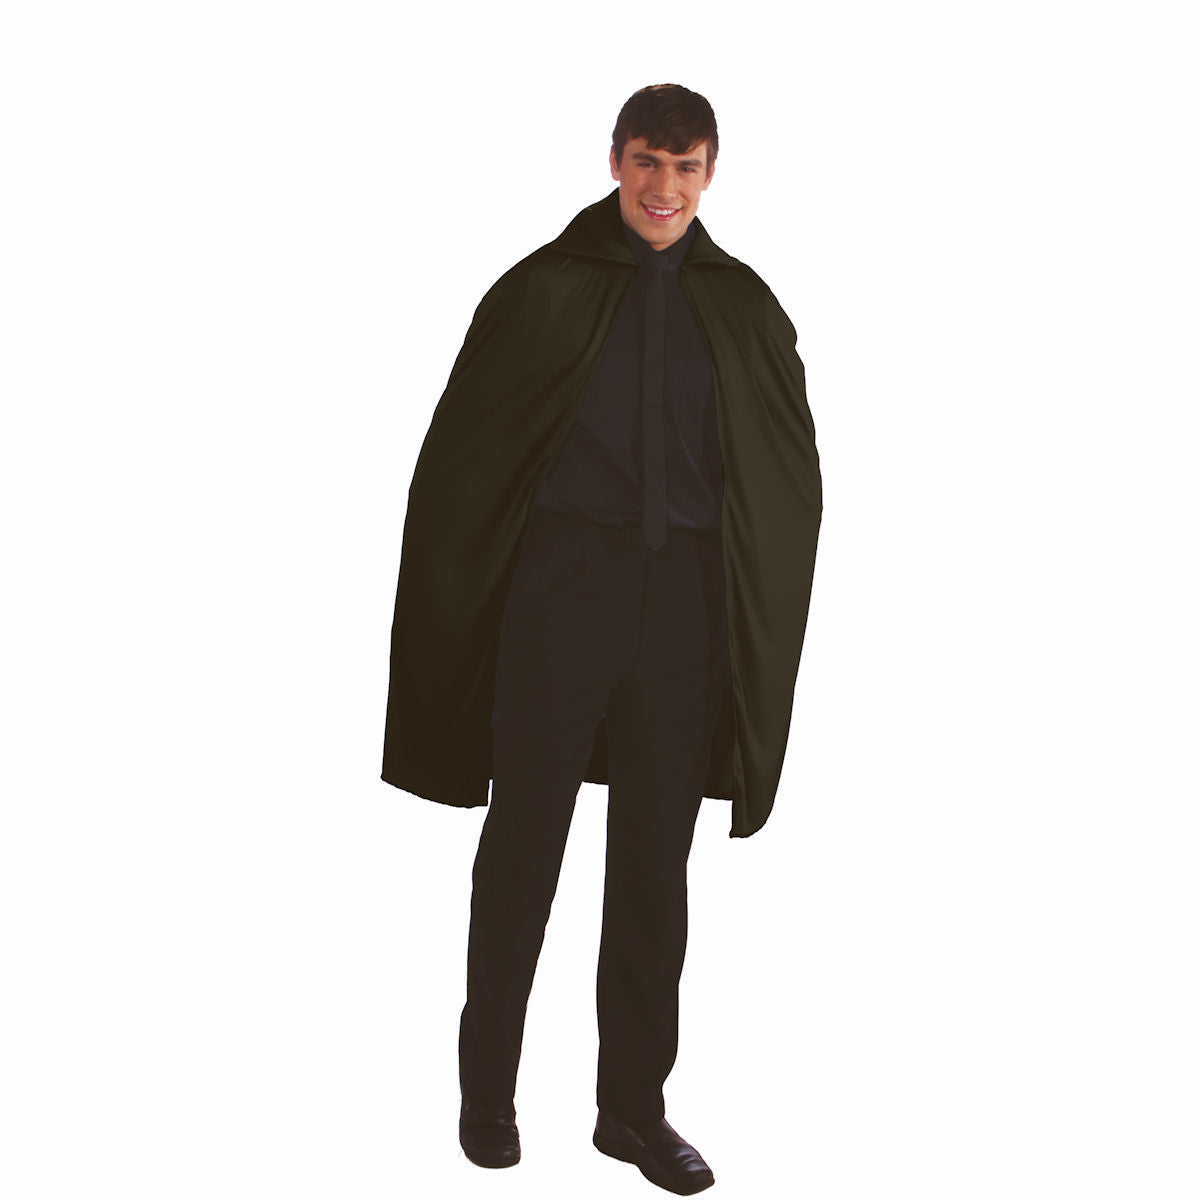 Black Cape Vampire 45" Long - Adult Fancy Dress Costume One size up to 42" chest